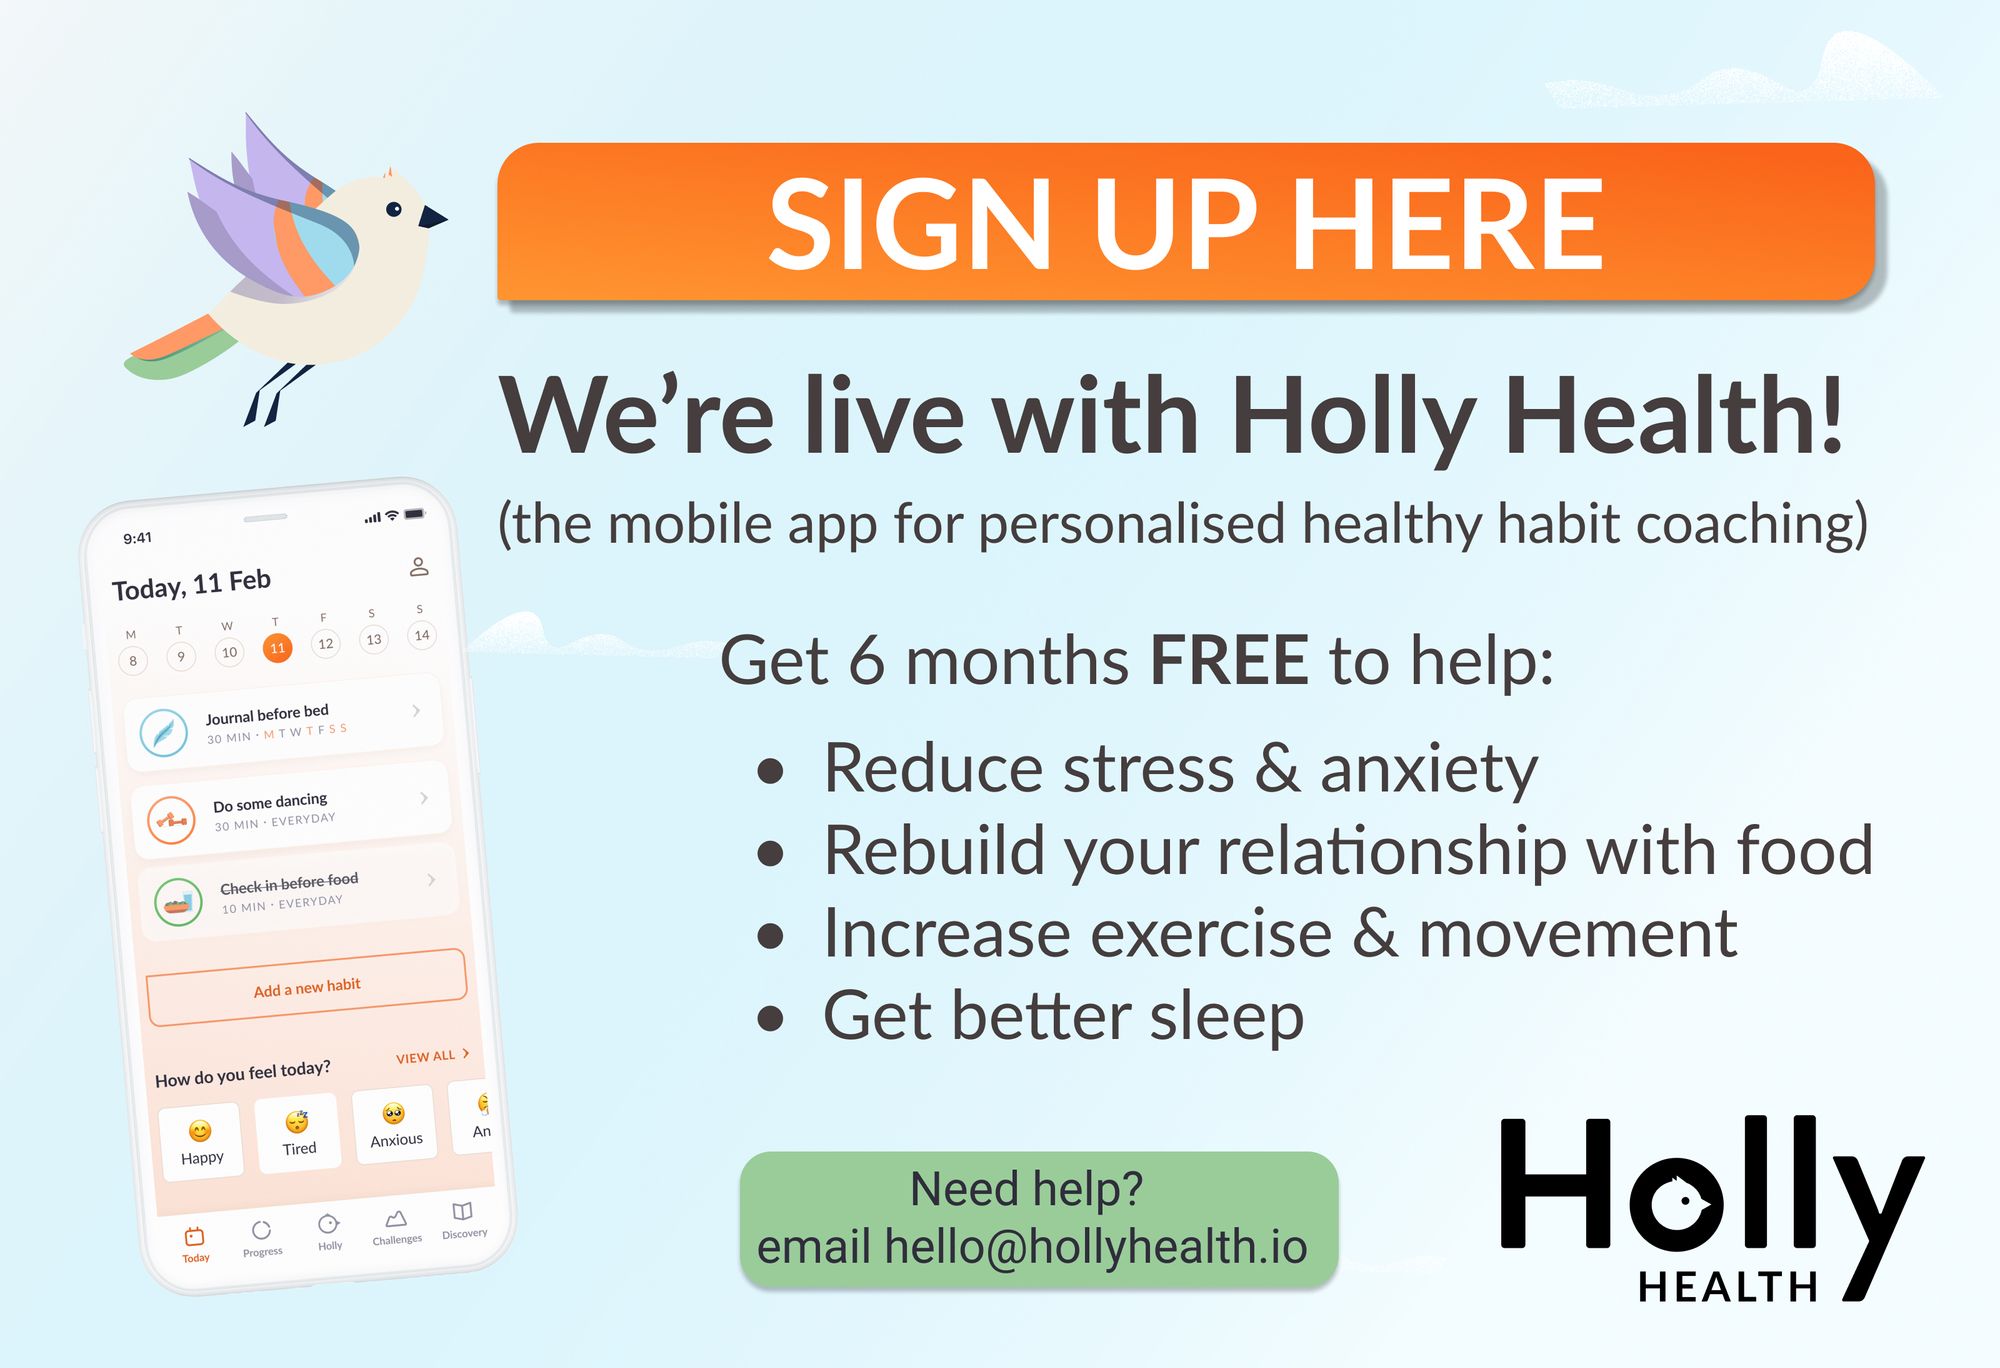 We're live with Holly Health!